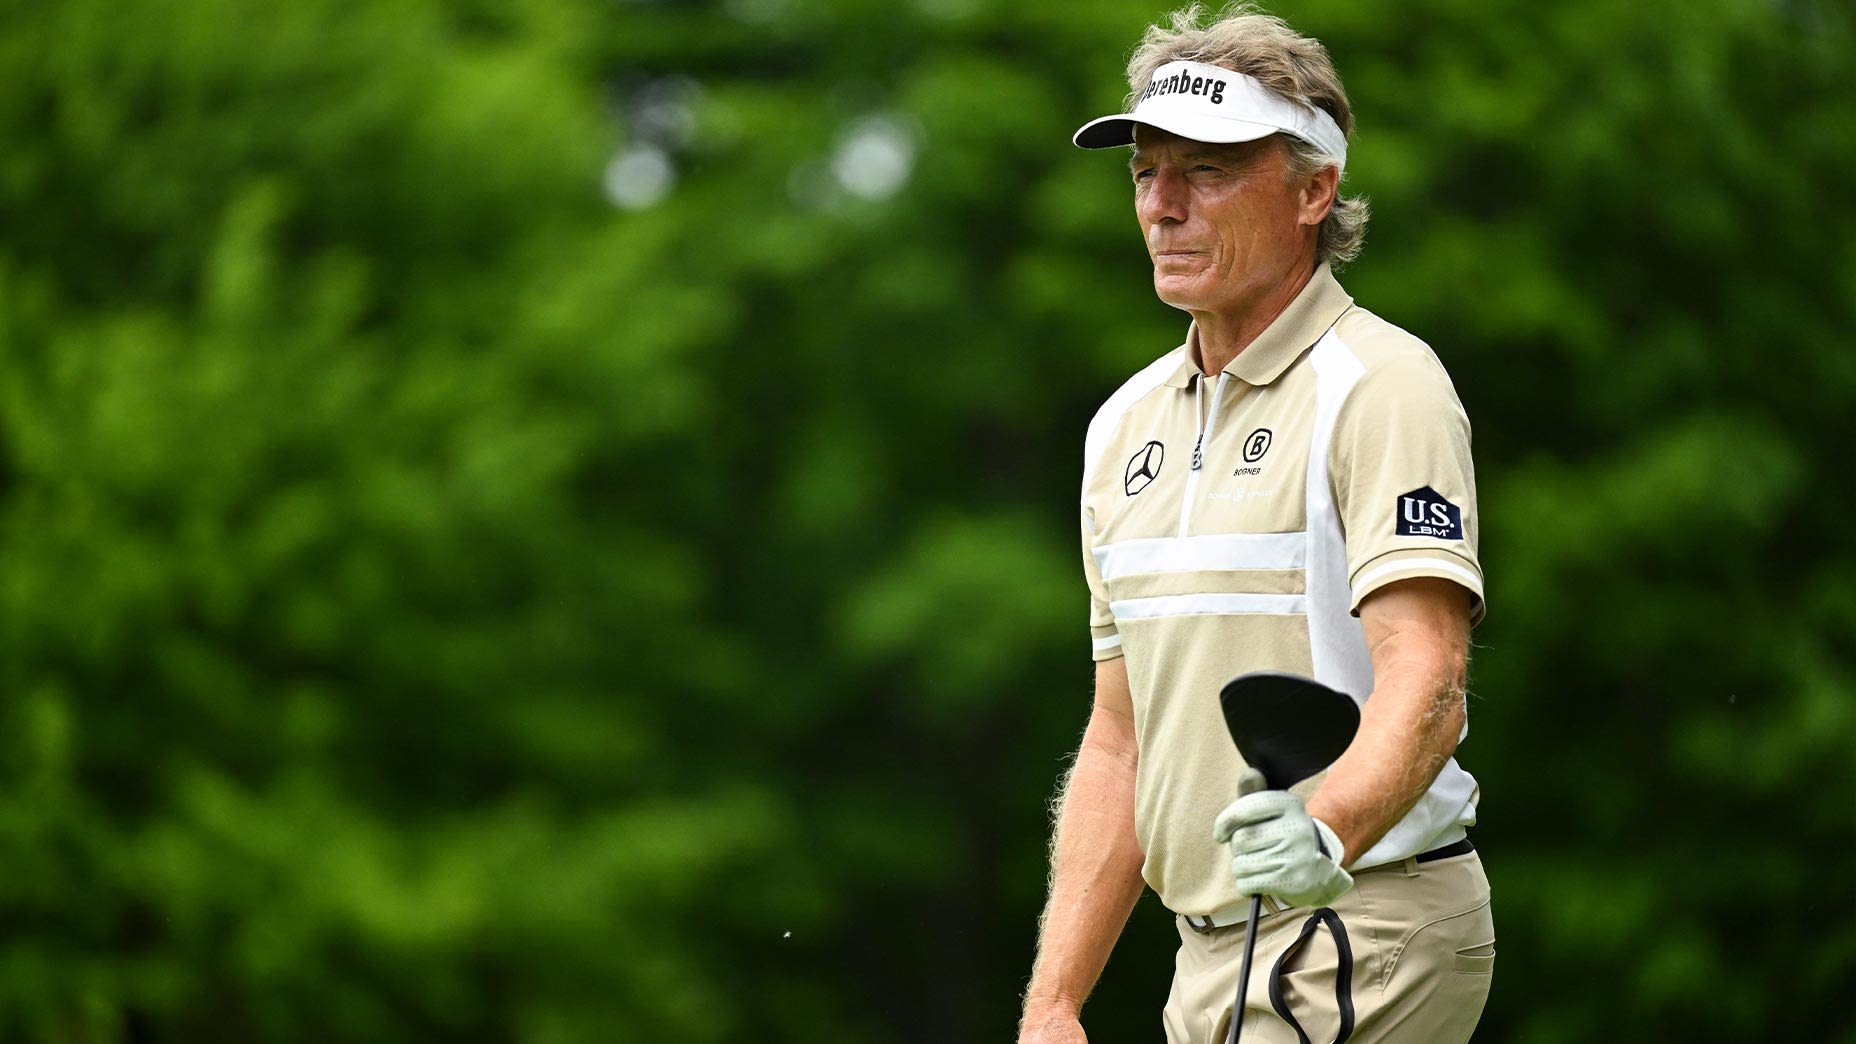 ‘Couldn’t believe it’: Cut confusion gives Bernhard Langer second life